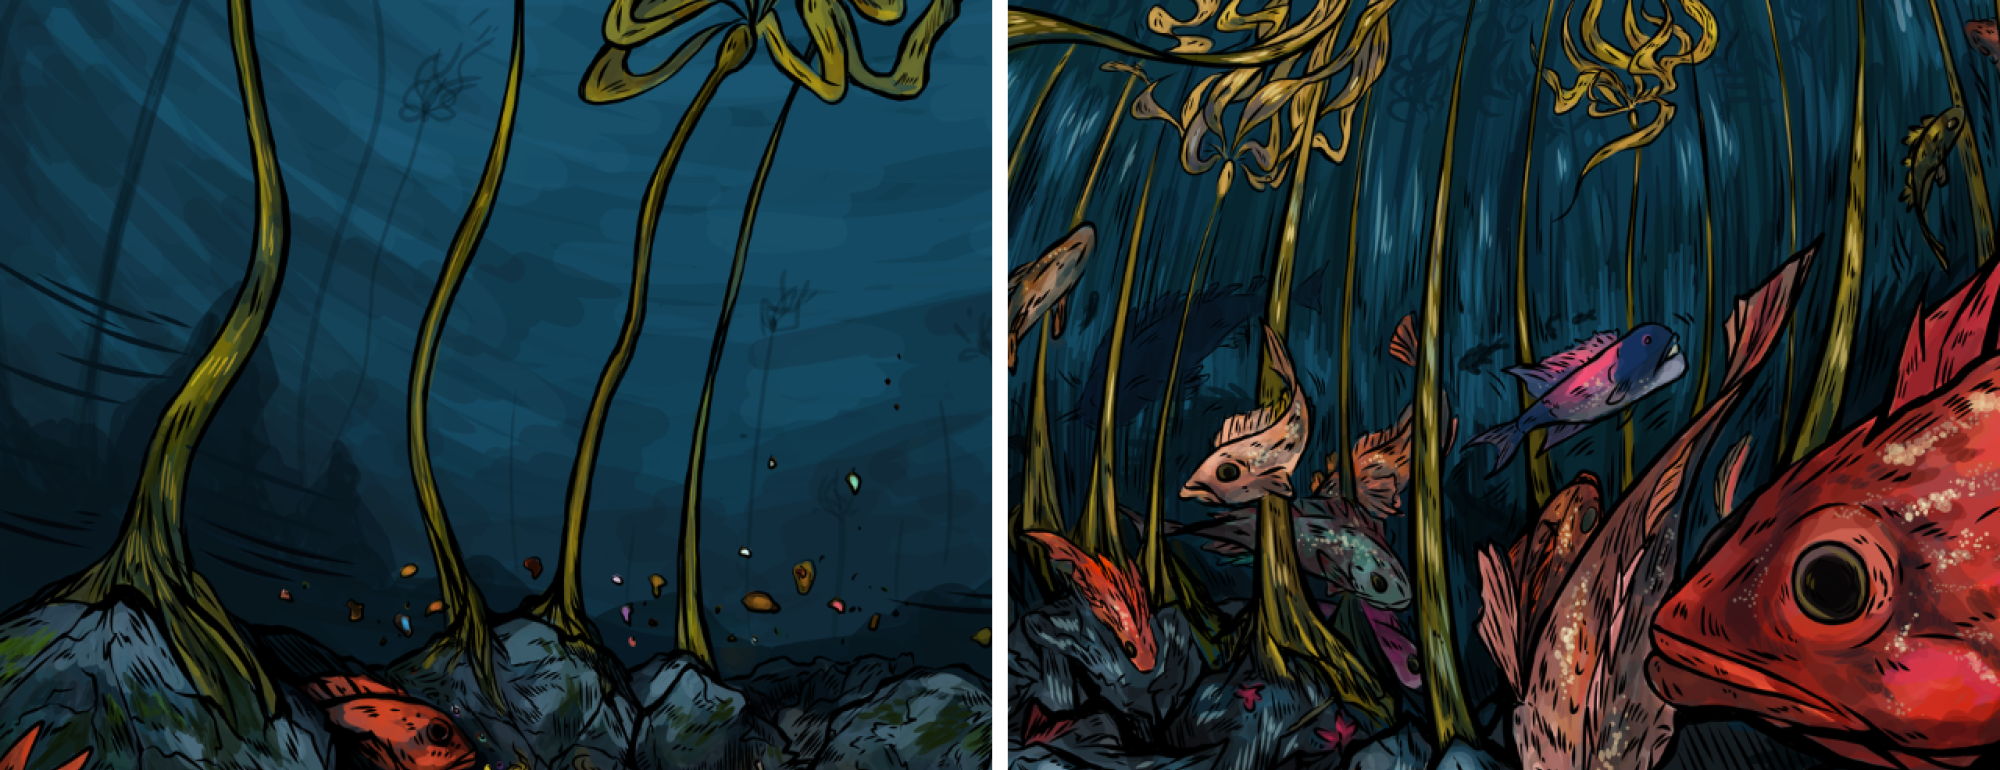 Two illustrated panels. On the left side, a barren seafloor with just a few pieces of bull kelp. On the right side is a vibrant seafloor with a forest of kelp, plentiful rockfish, and a diverse range of other marine life.